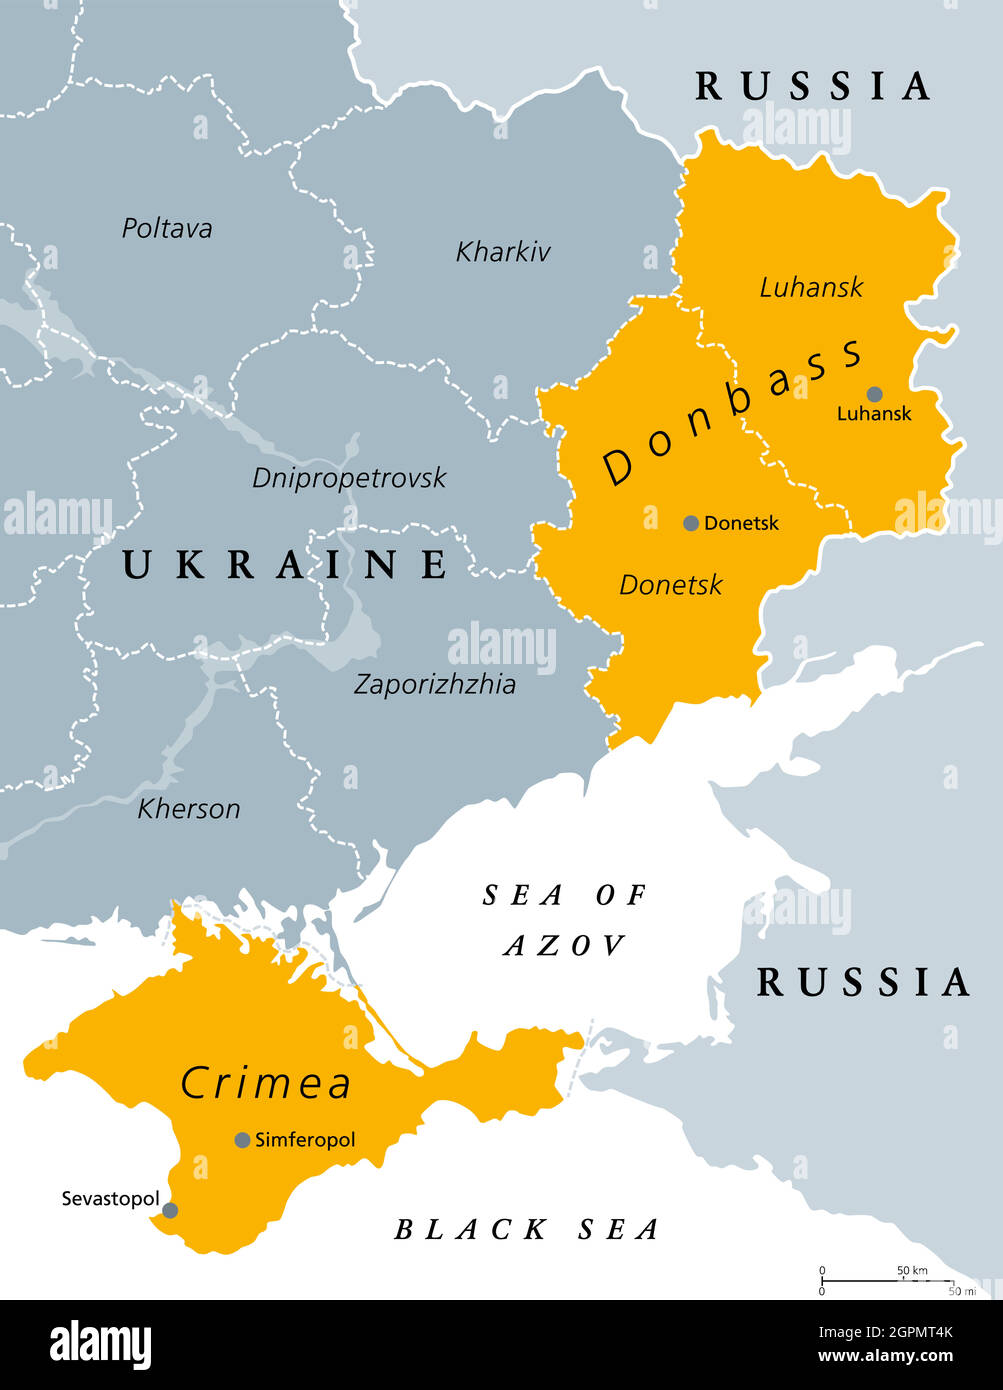 Donbass and Crimea, disputed areas between Ukraine and Russia, political map Stock Vector